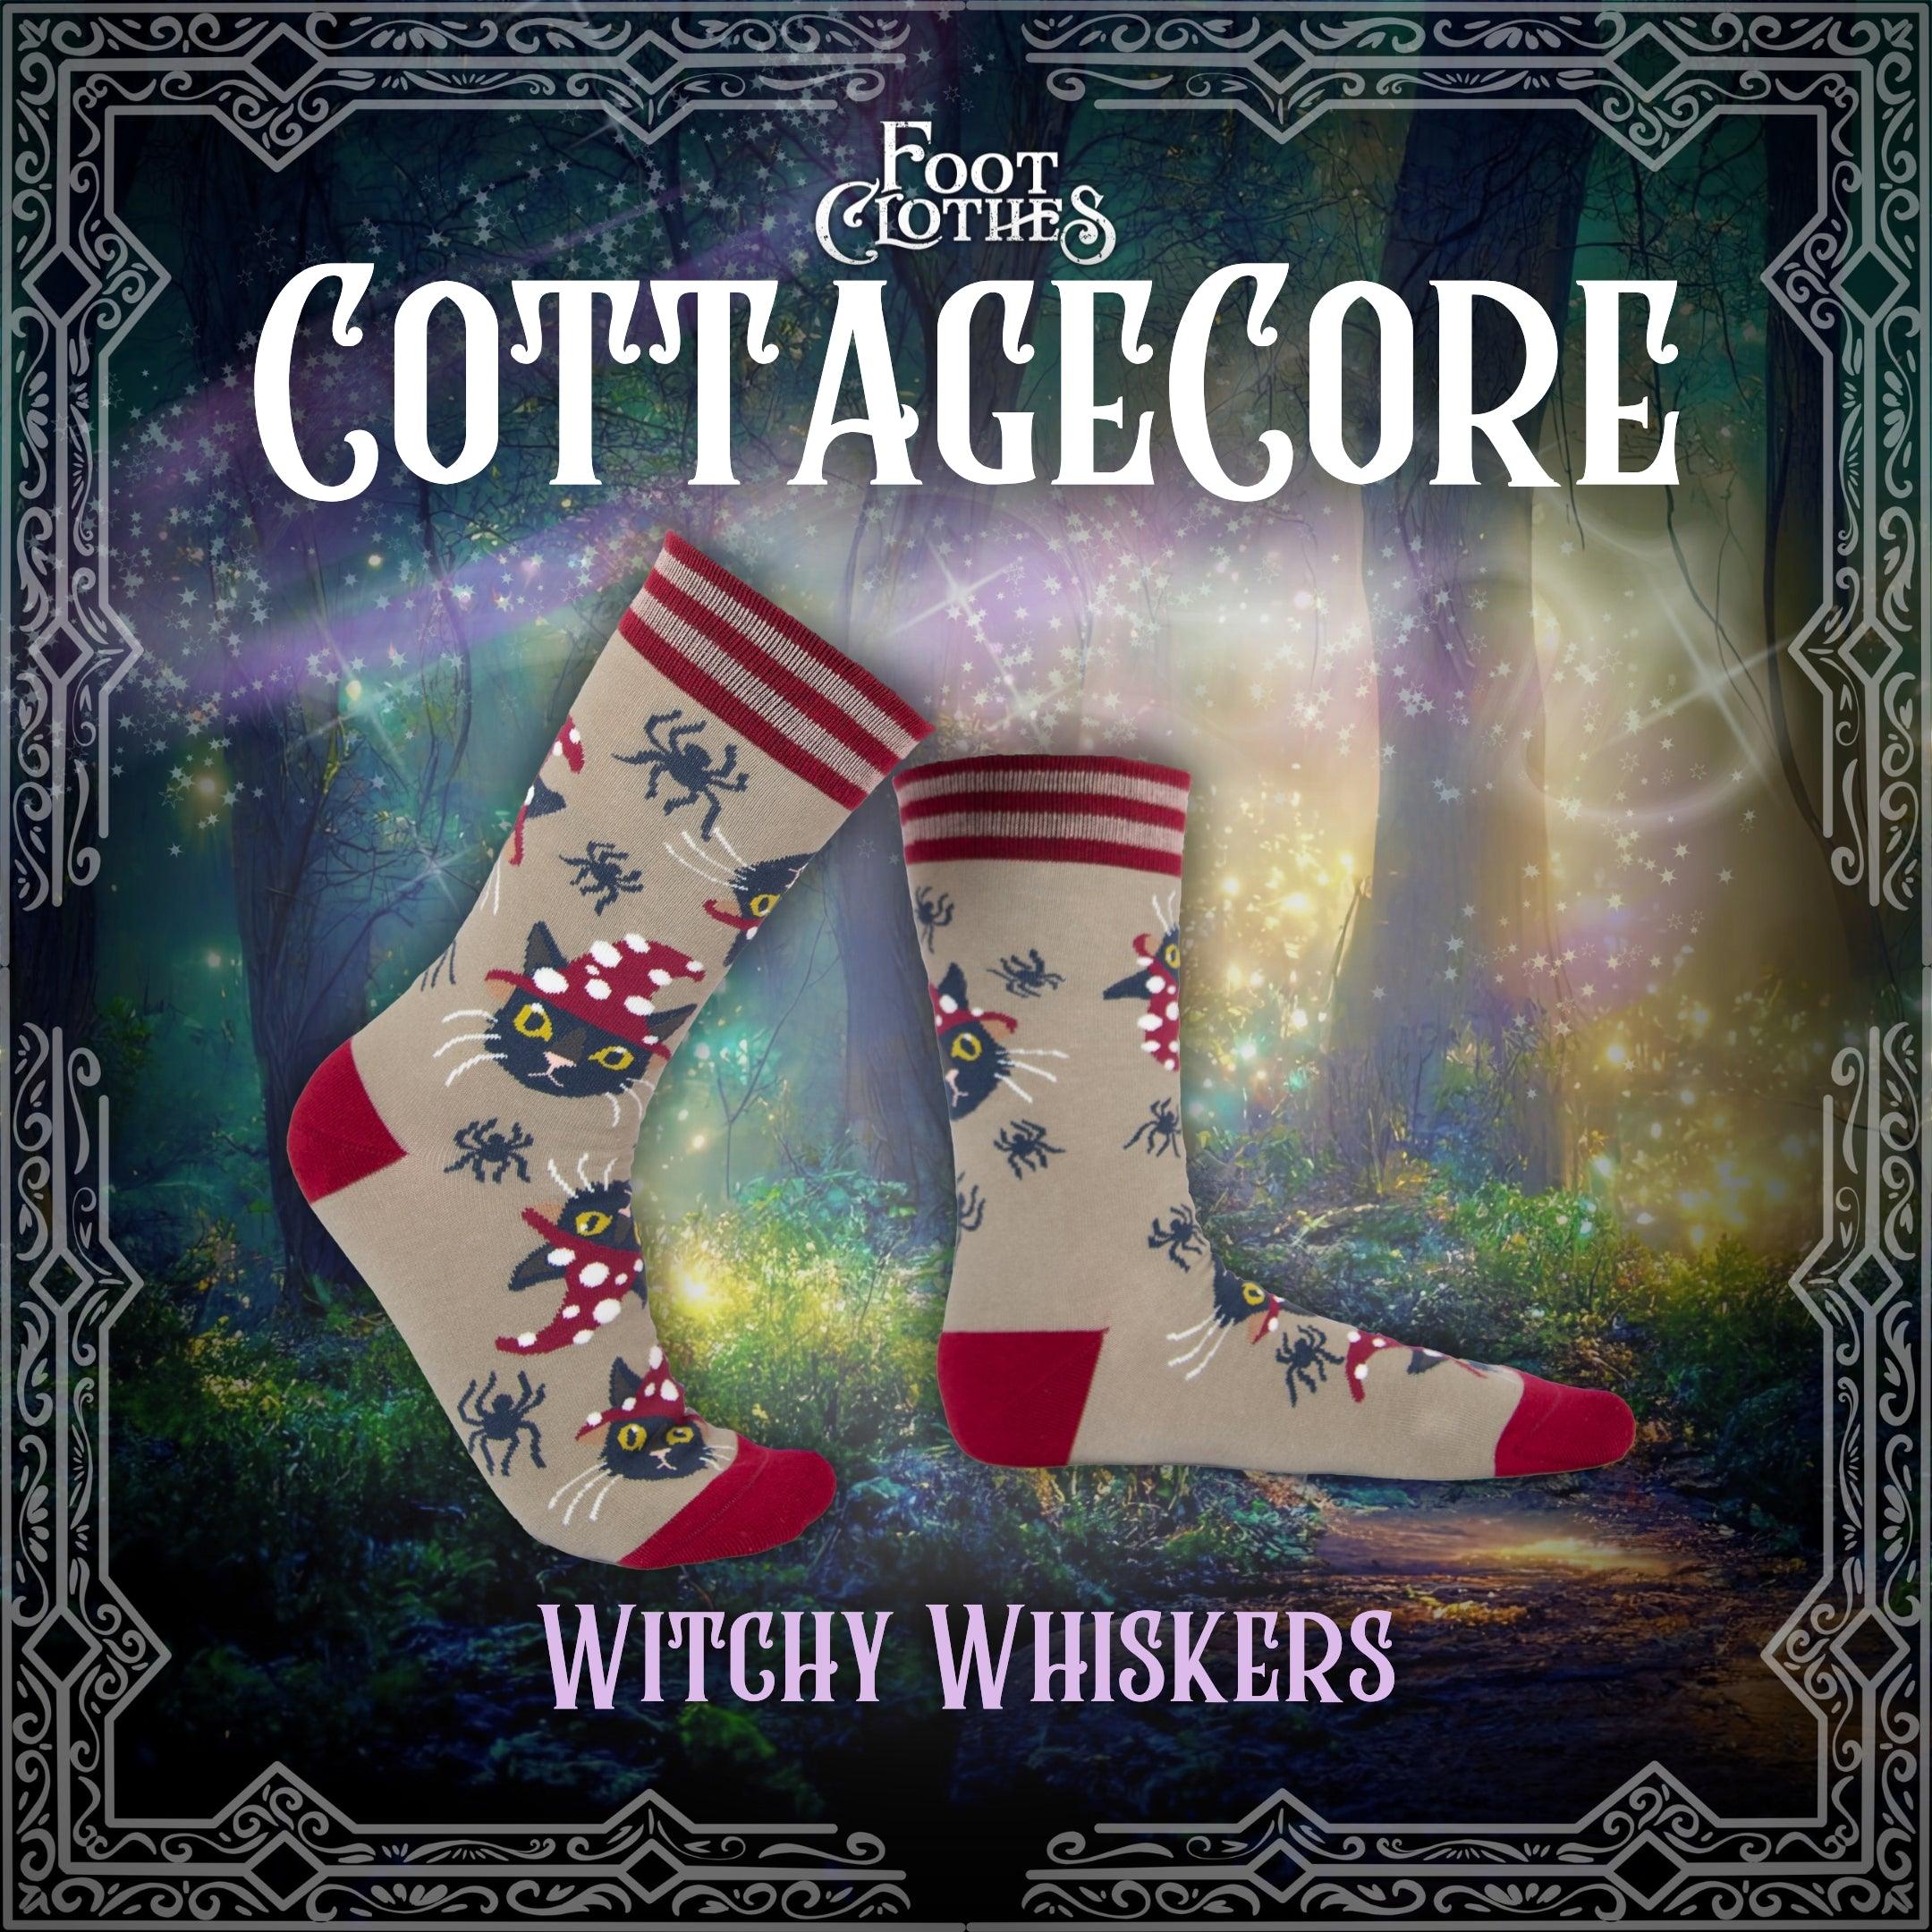 Cottagecore Crew Sock Pack | 5 Designs | FootClothes | Sock Pack | 19P